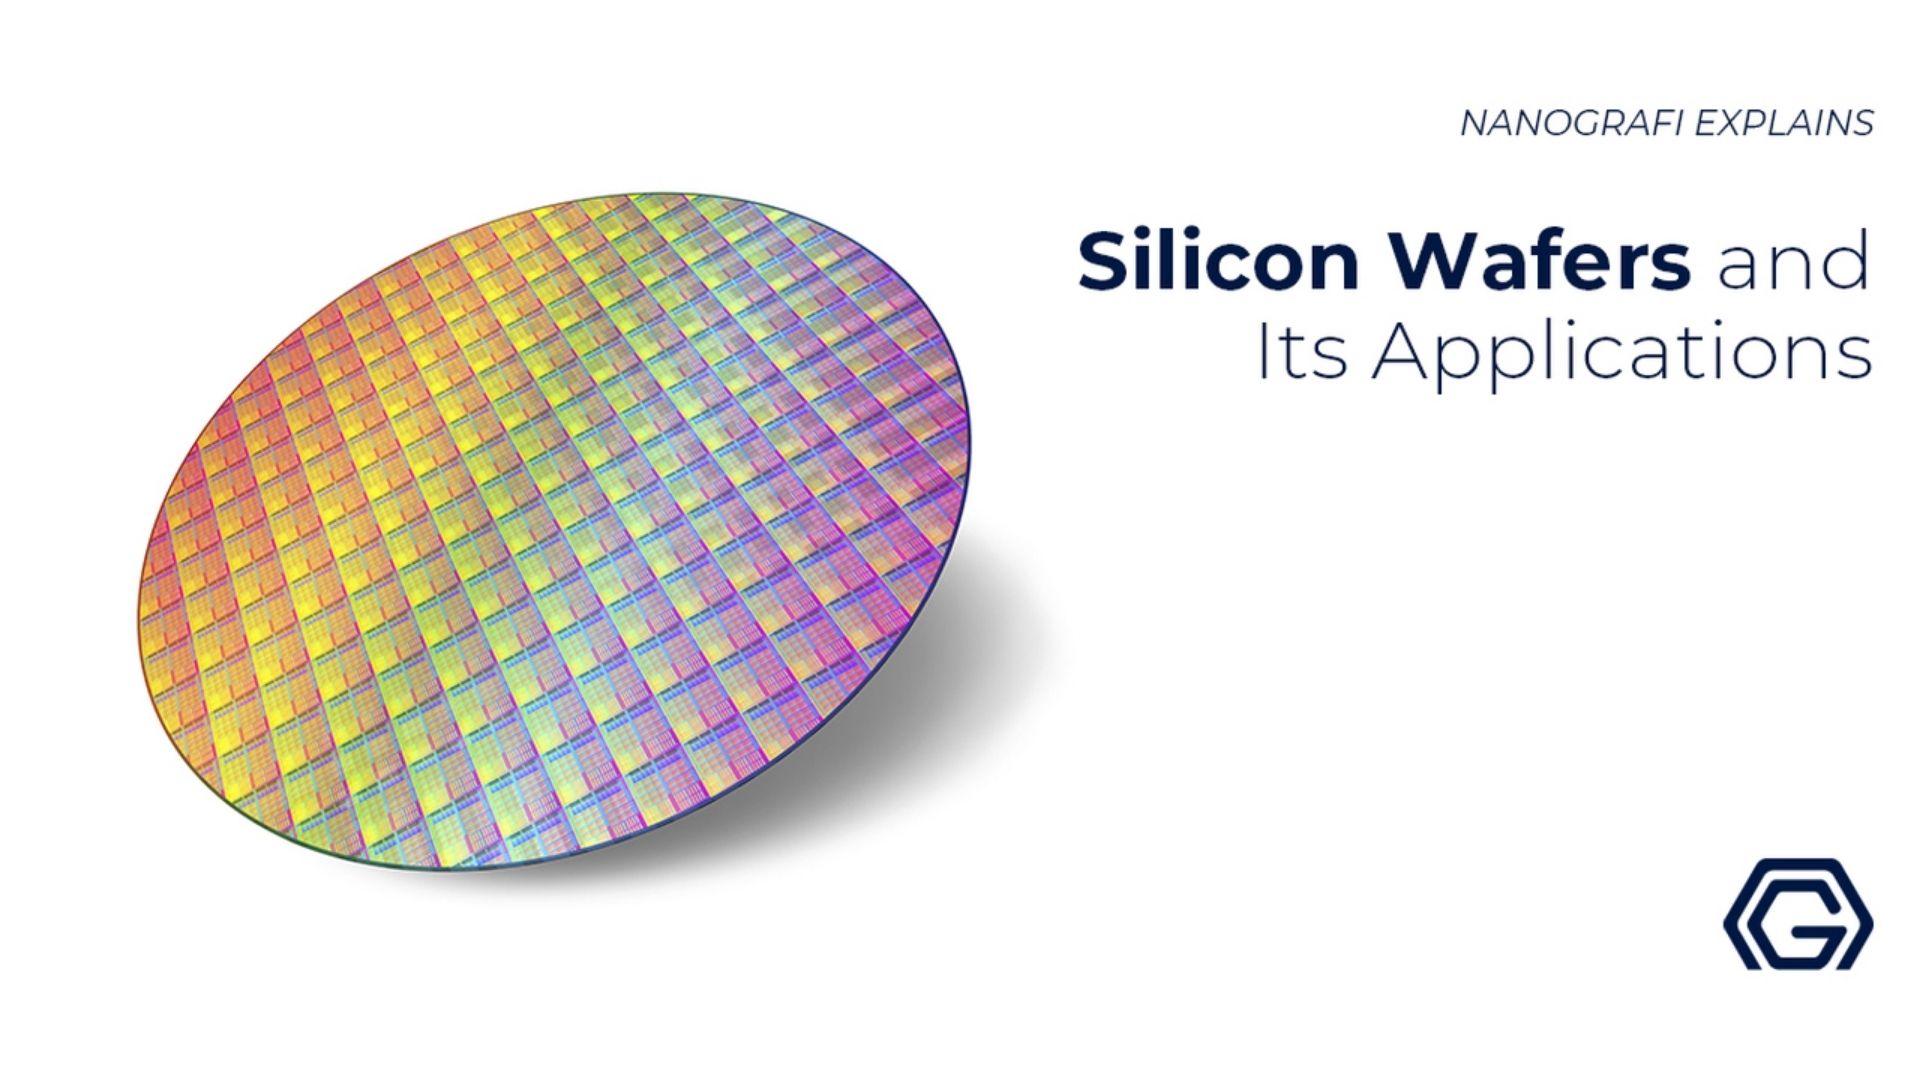 Silicon Wafers and Their Applications